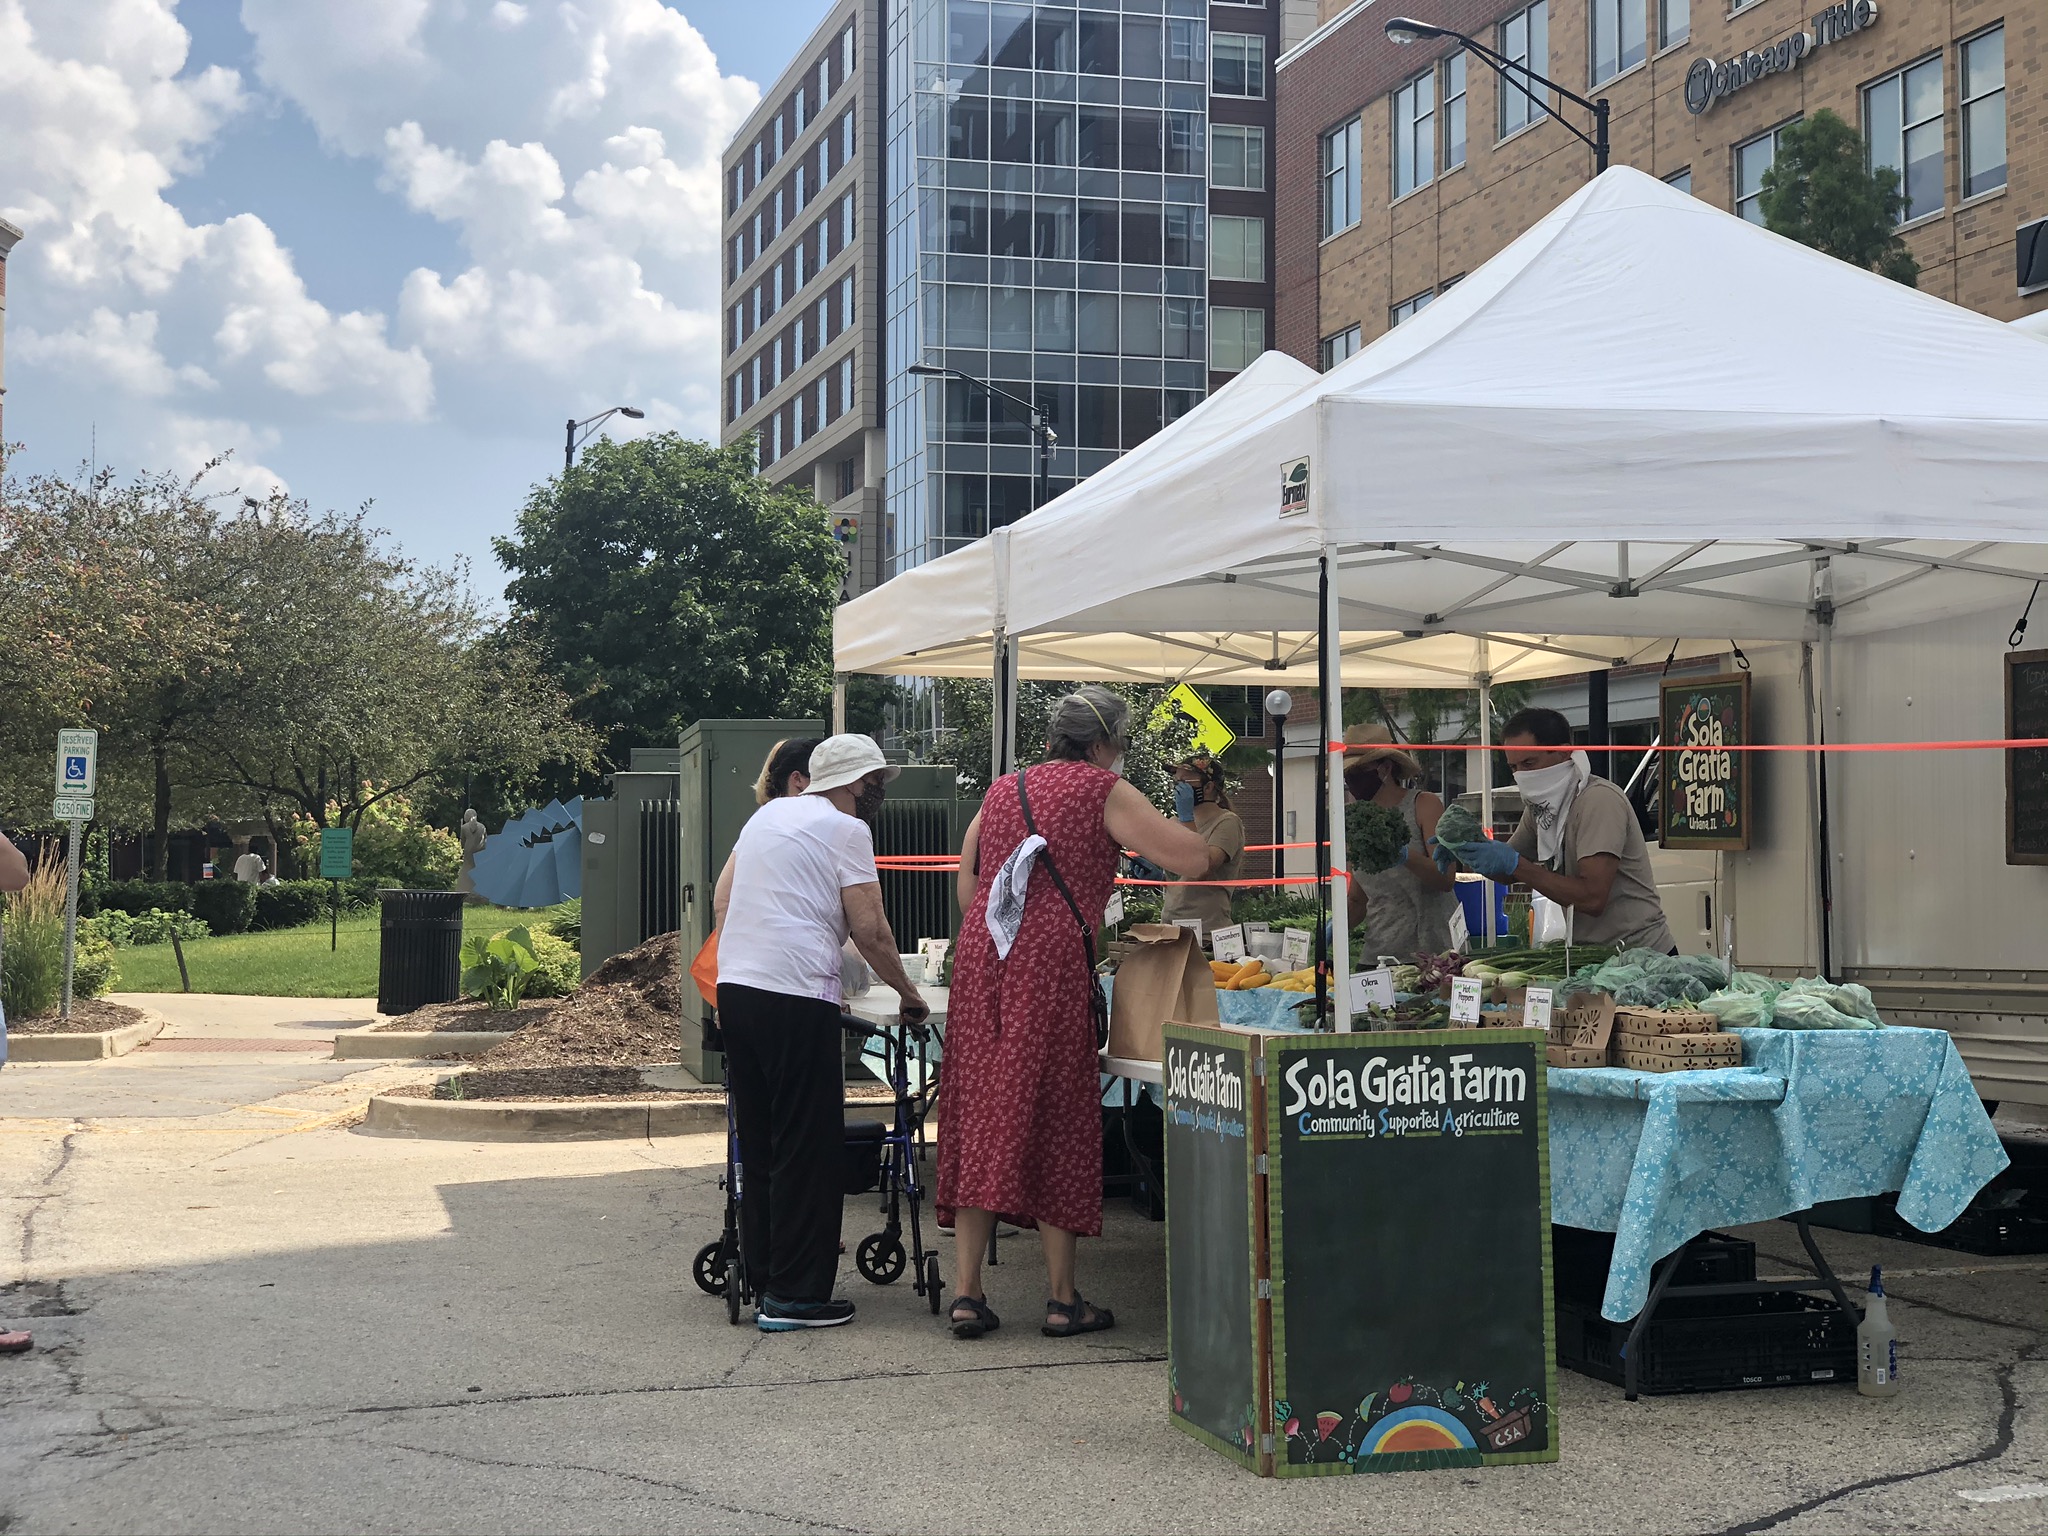 Two shoppers purchase goods from Sola Gratia Farm stand at the Champaign Farmers' Market. Photo by Alyssa Buckley.